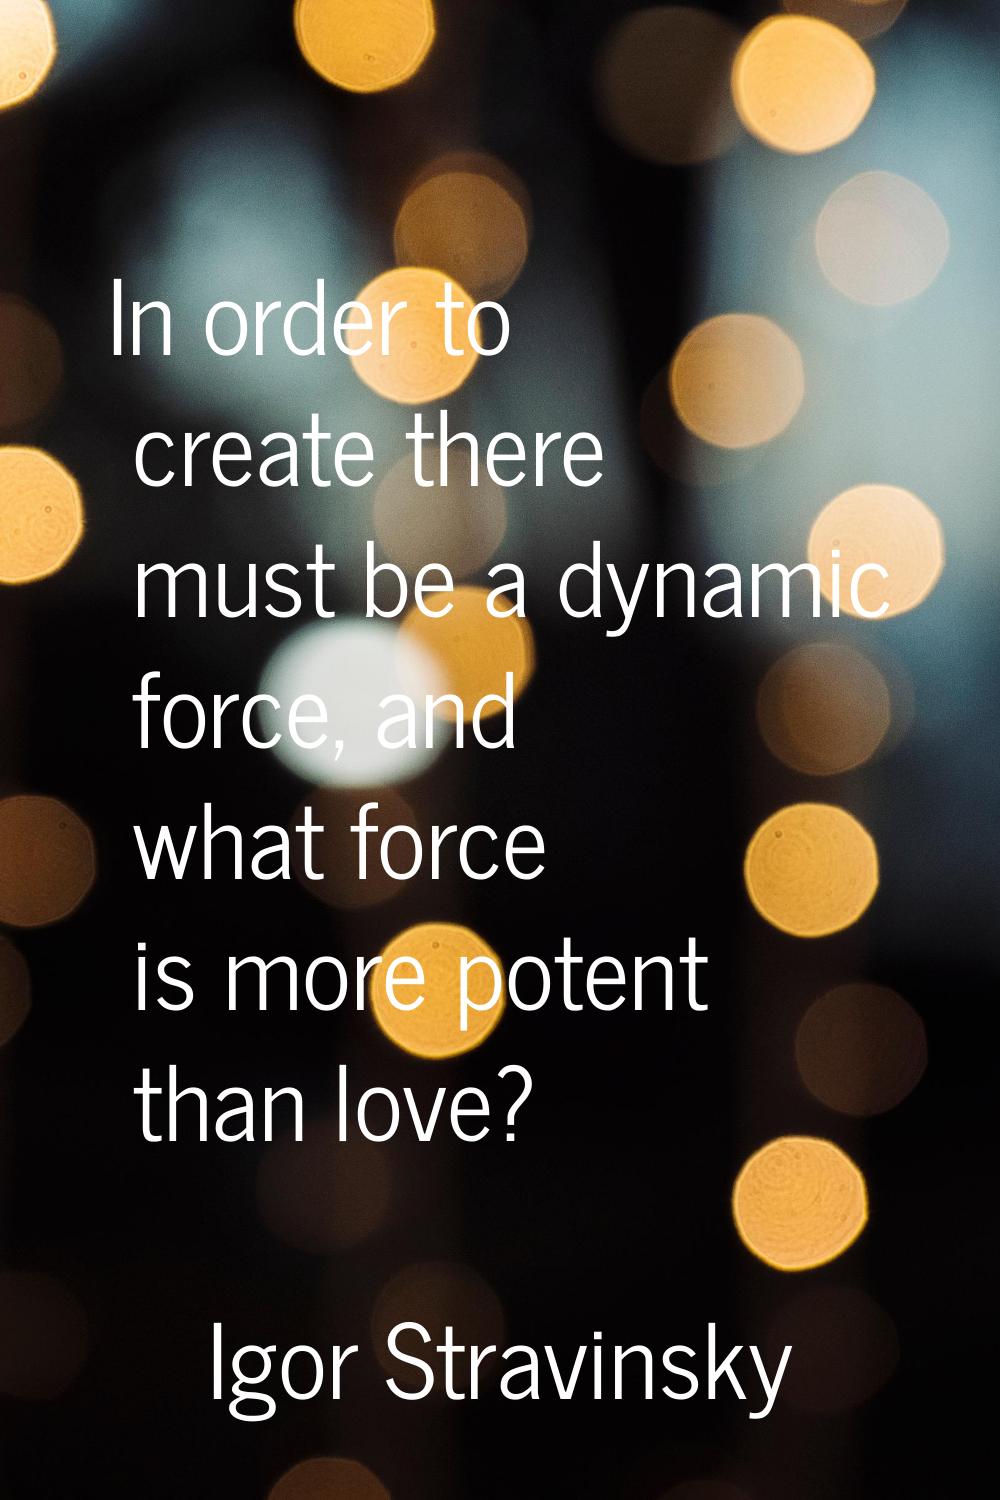 In order to create there must be a dynamic force, and what force is more potent than love?